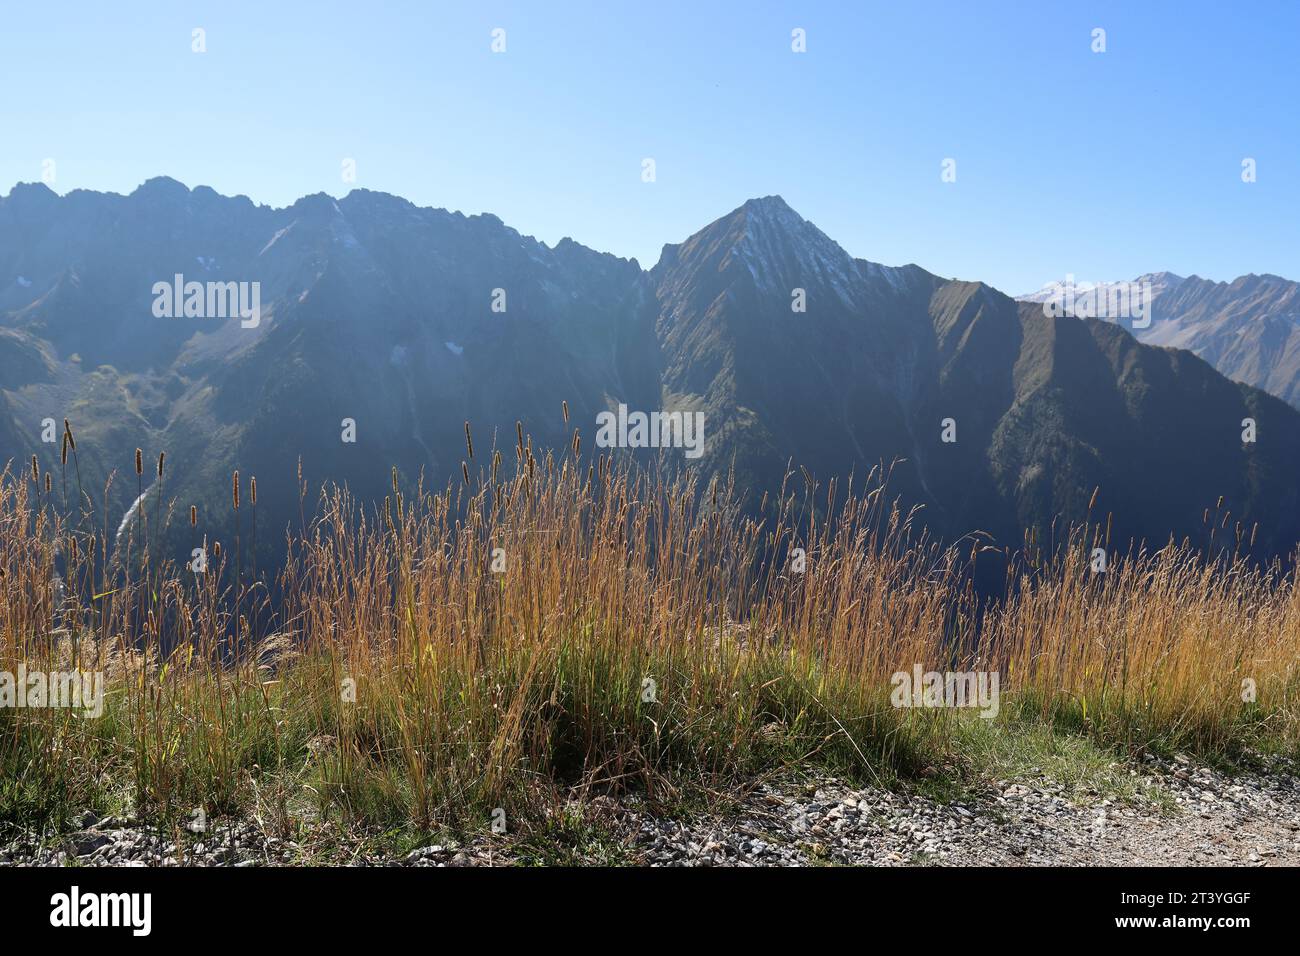 View of beautiful golden yellow grasses in front of dark mountain massifs Stock Photo